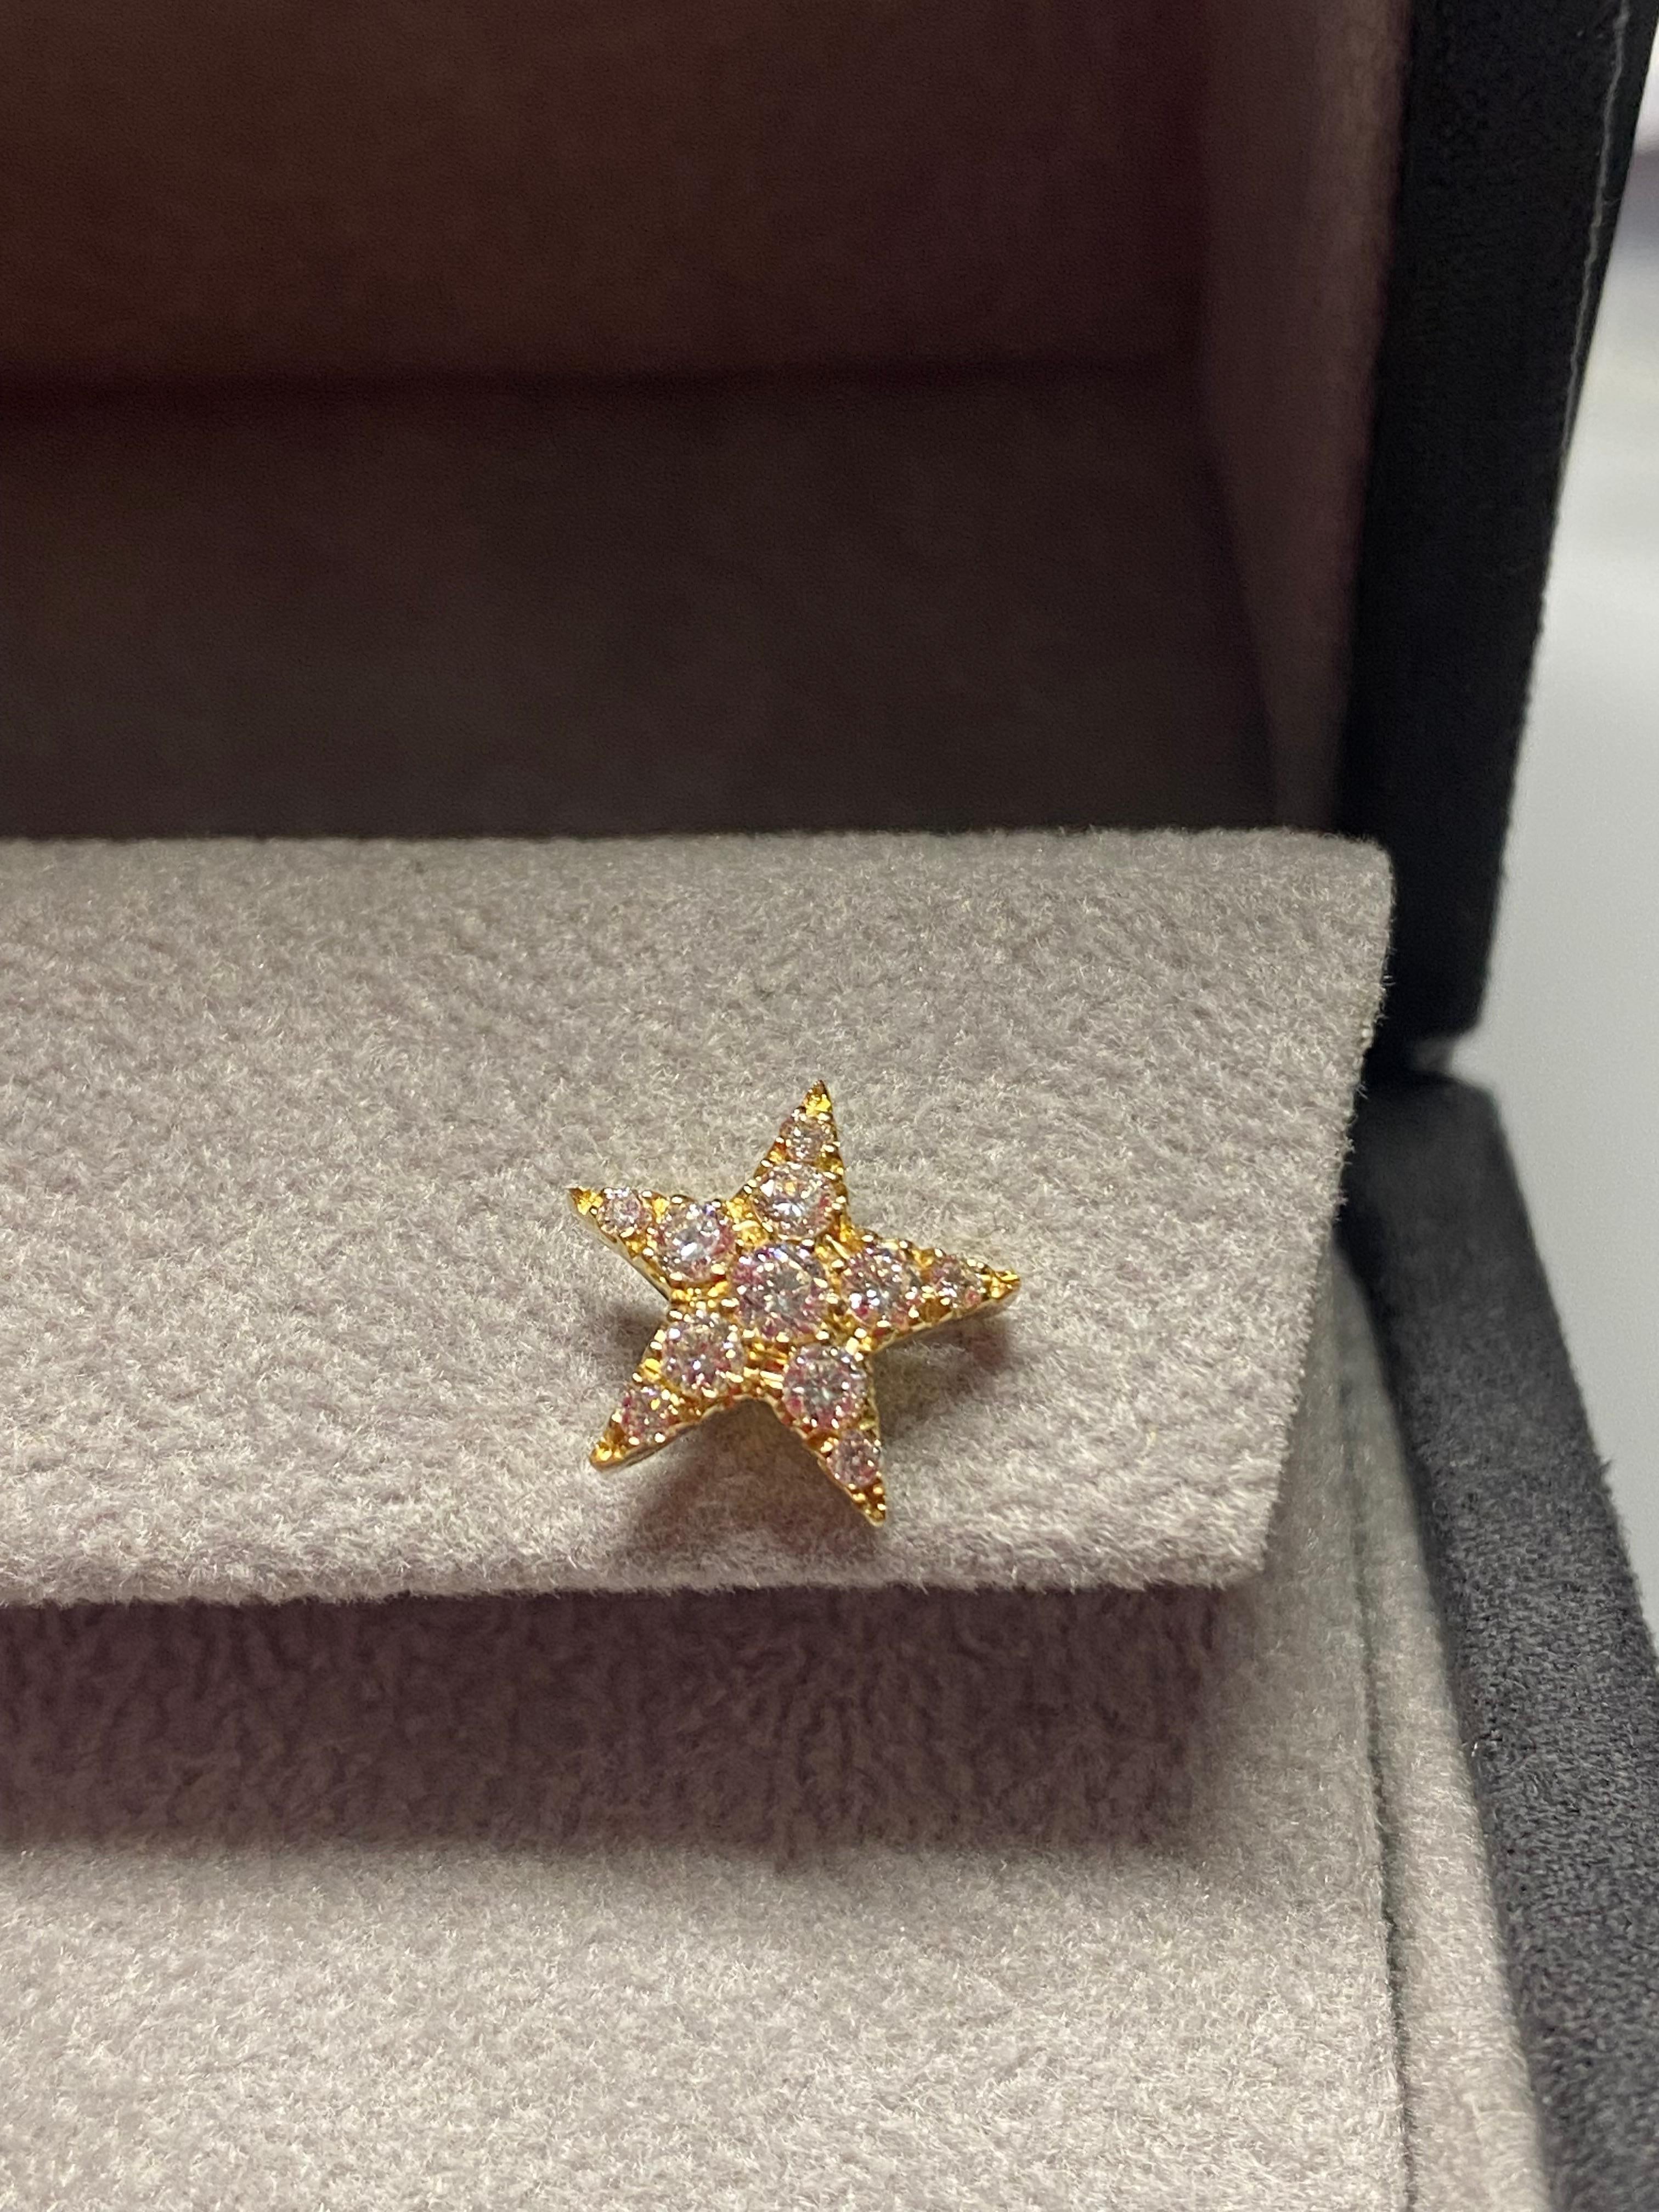 Beautifully pavé set in diamonds, the single Star lobe earring is handcrafted in Italy, in Margherita Burgener workshop. Very sparkling and very chic.
SINGLE STAR - in the pictures you can see also the single one in white gold.
Size inches 0,472  at